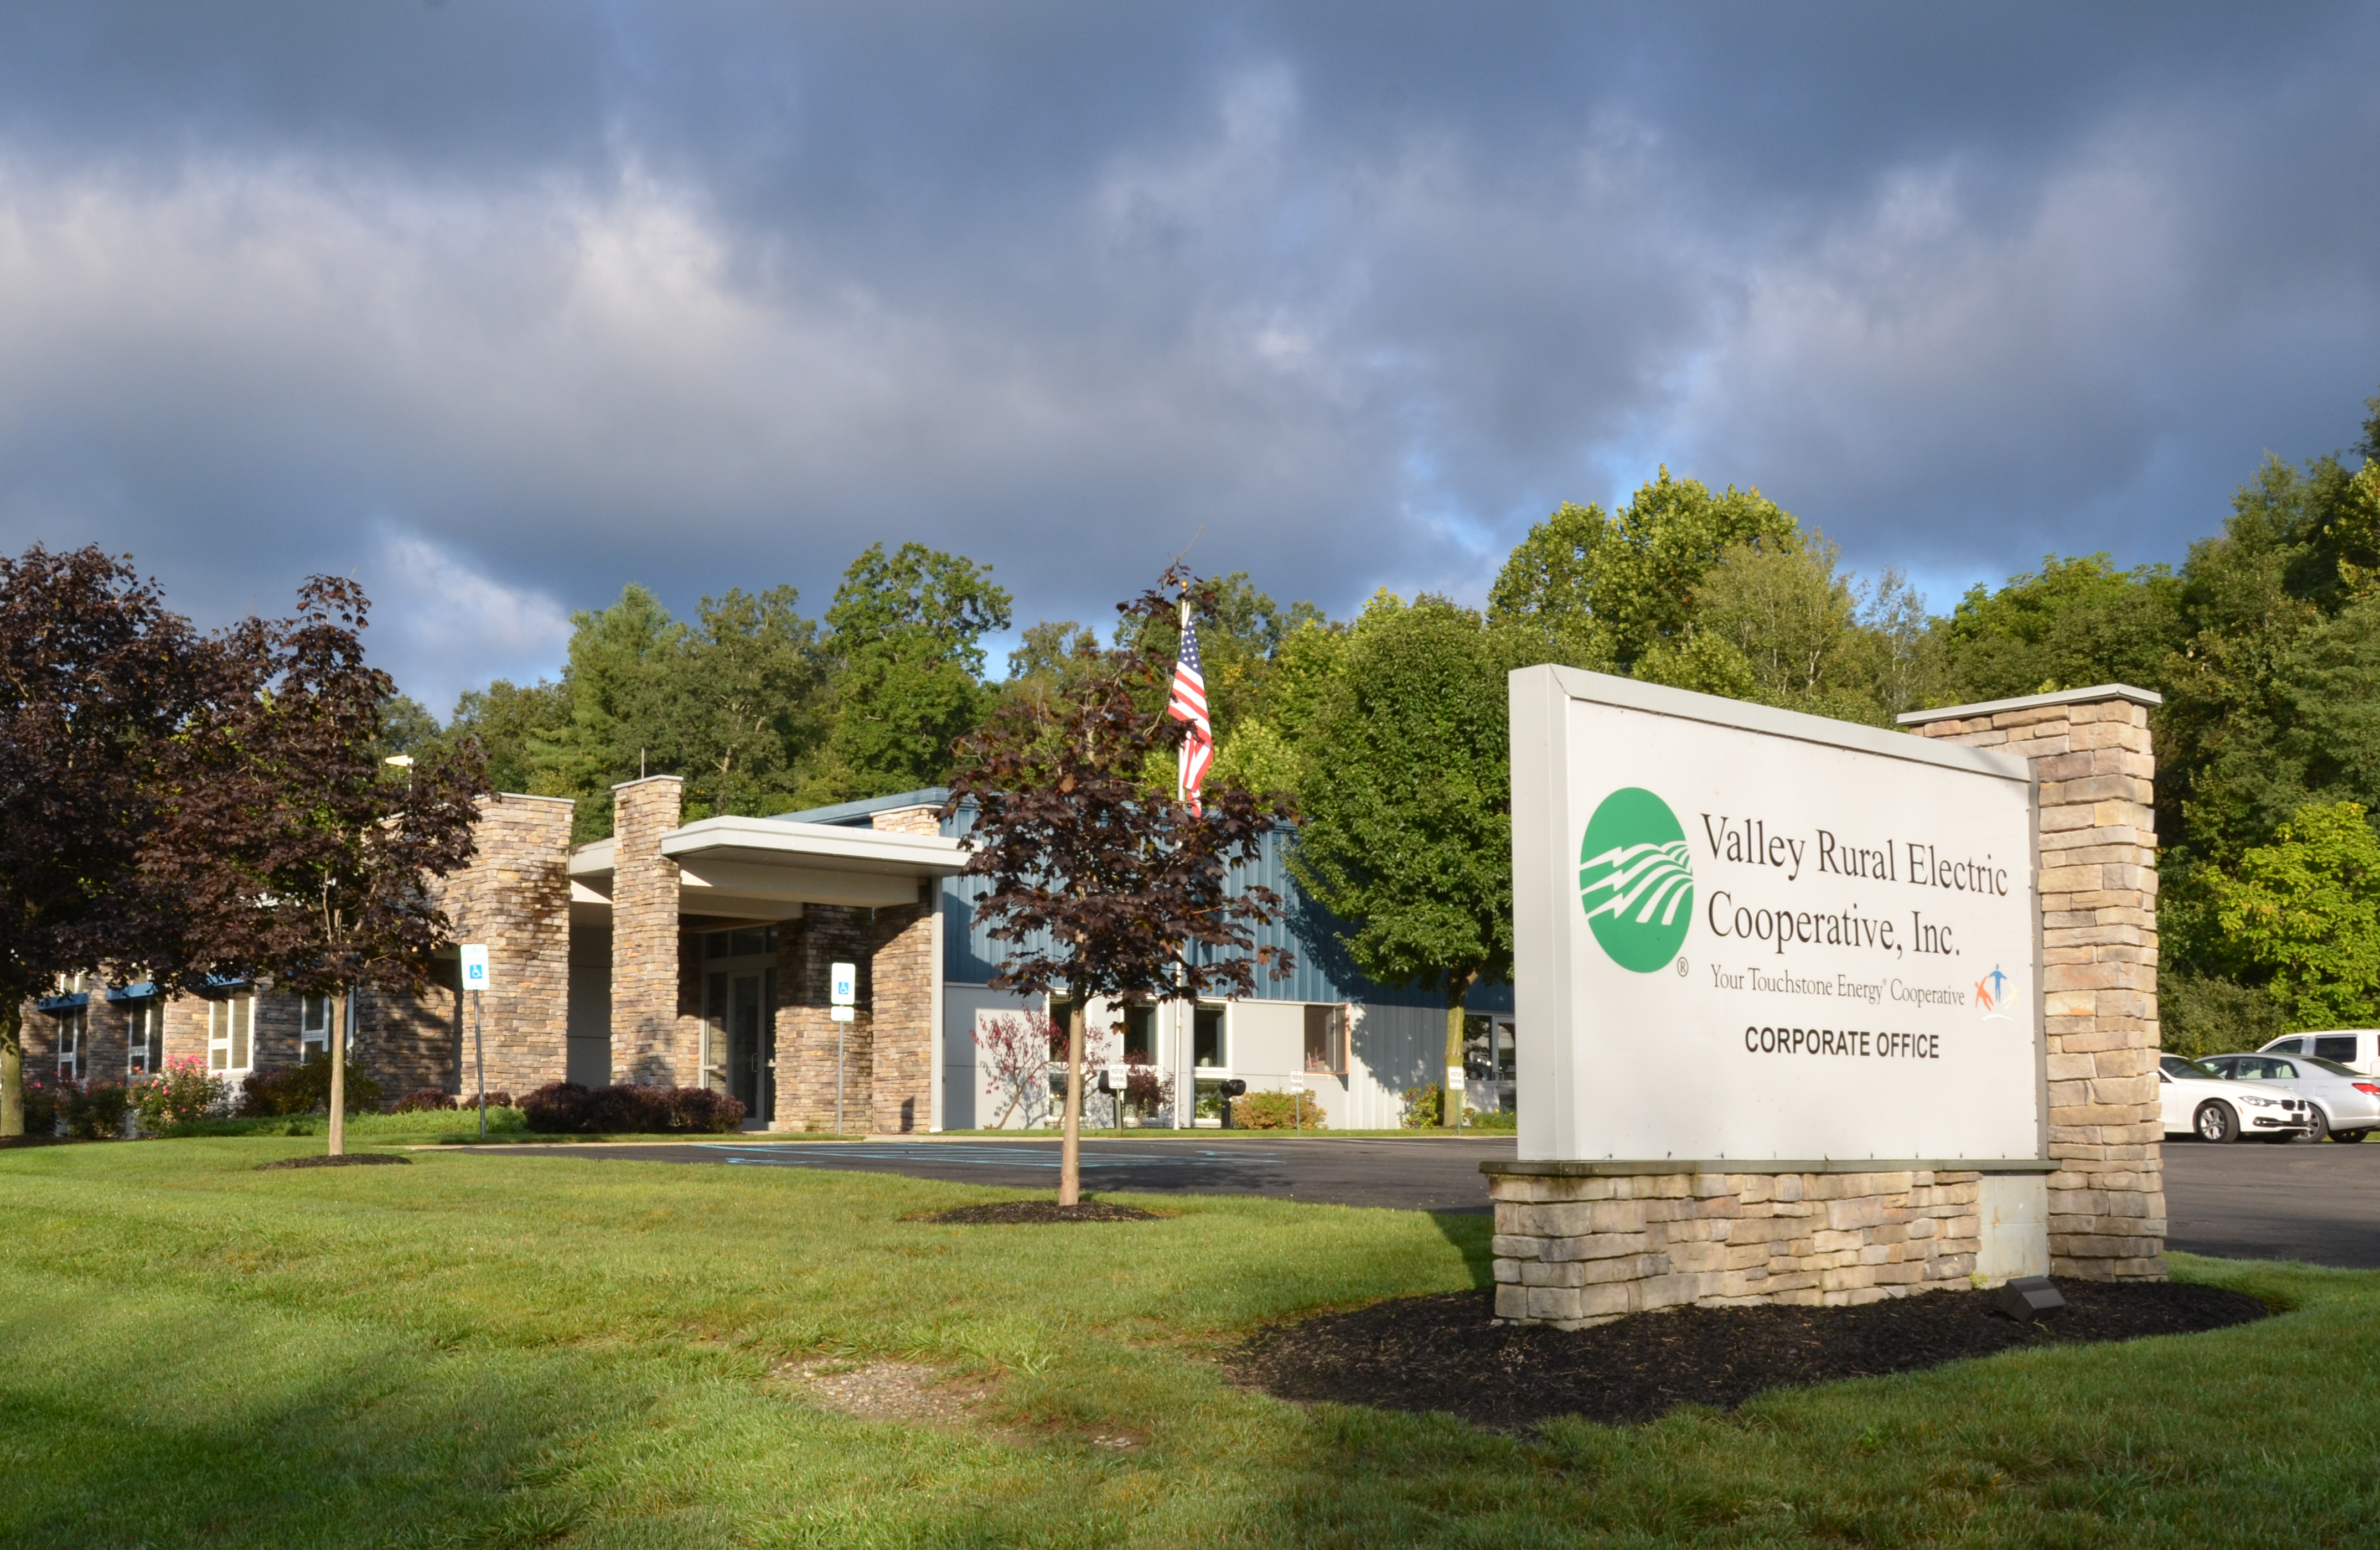 Valley Rural Electric Cooperative corporate office and sign